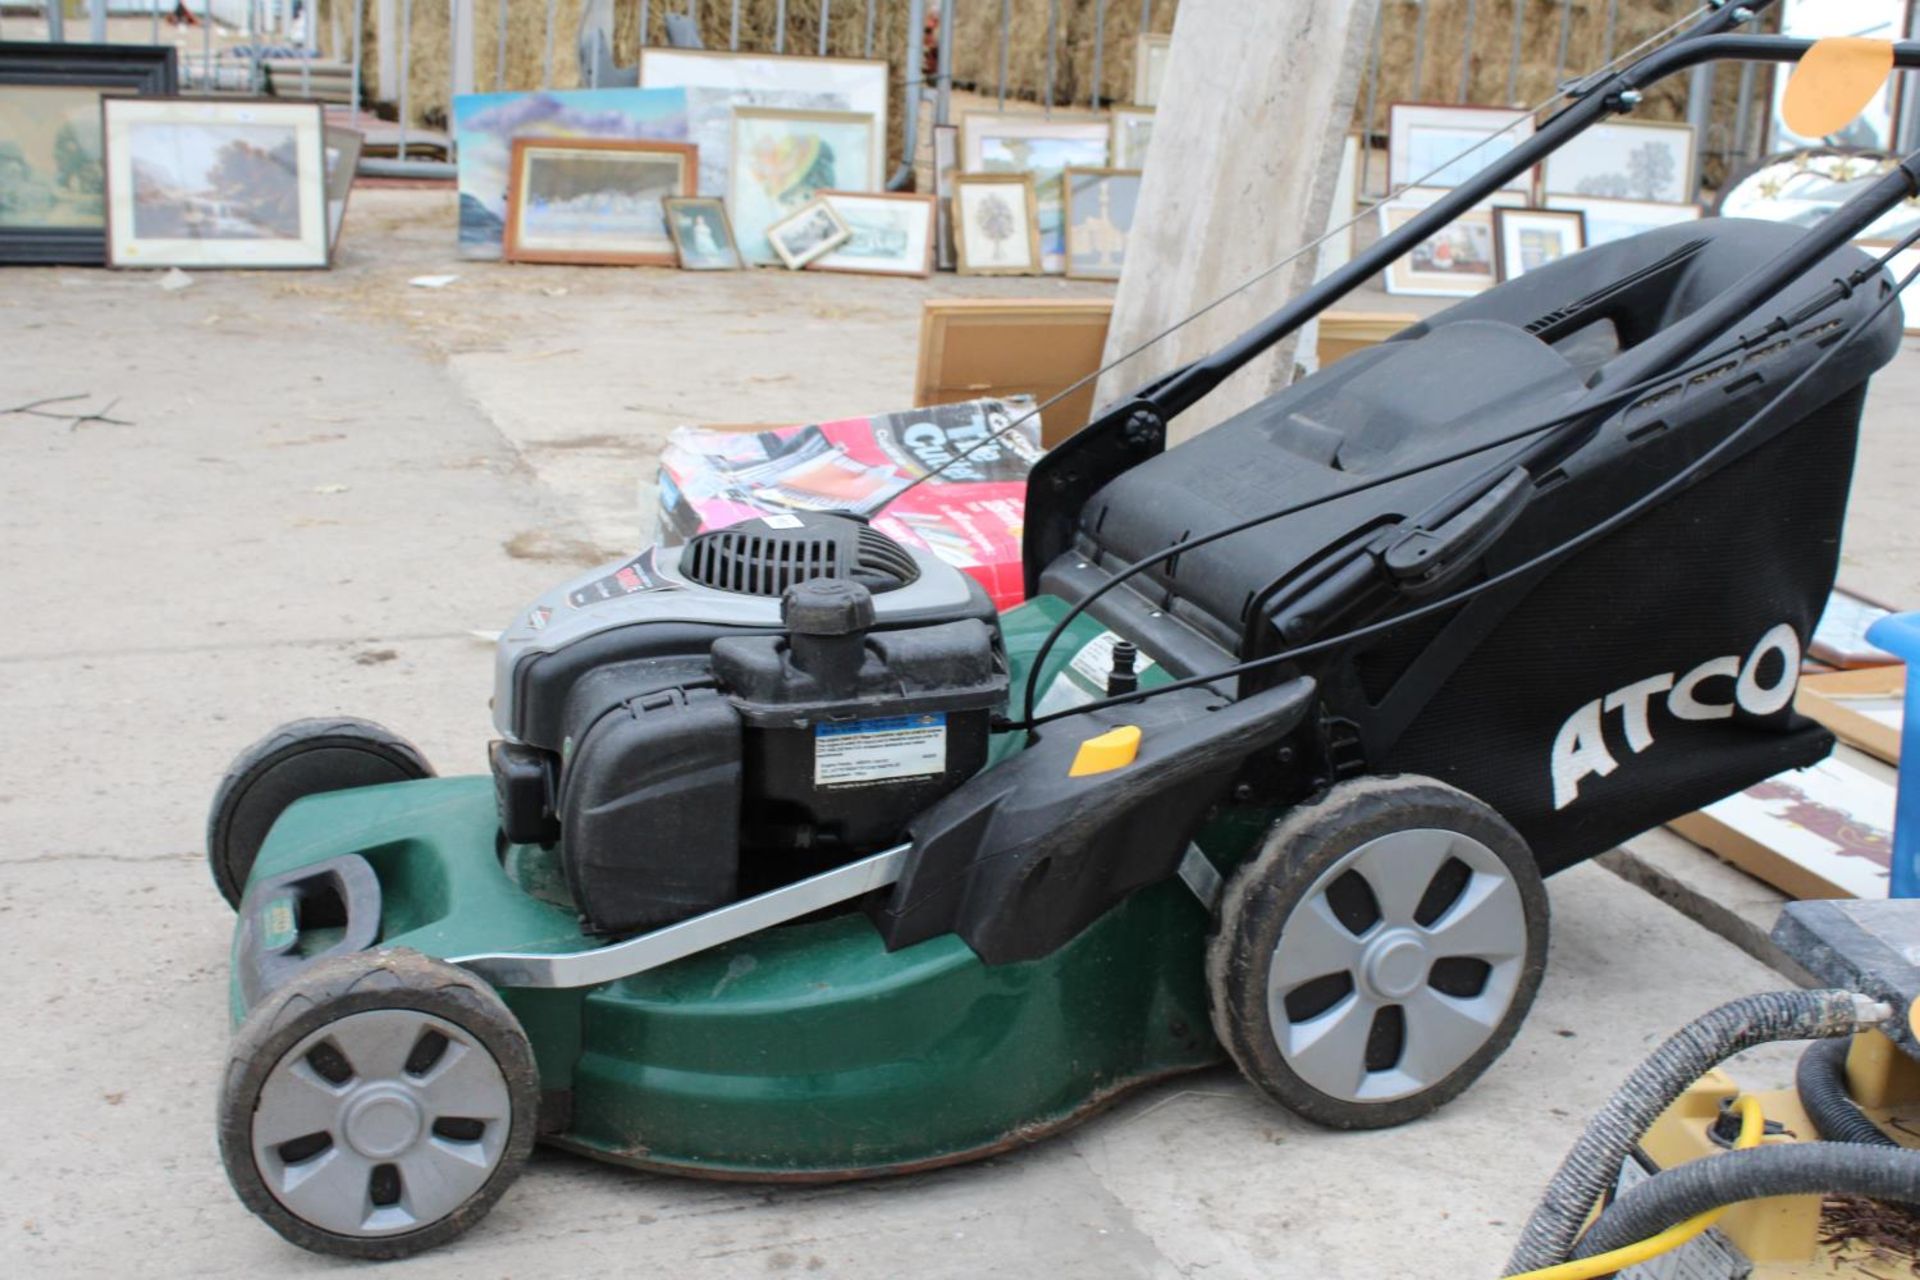 AN ATCO PETROL LAWN MOWER WITH GRASS BOX AND BRIGGS AND STRATTON ENGINE - Bild 4 aus 4